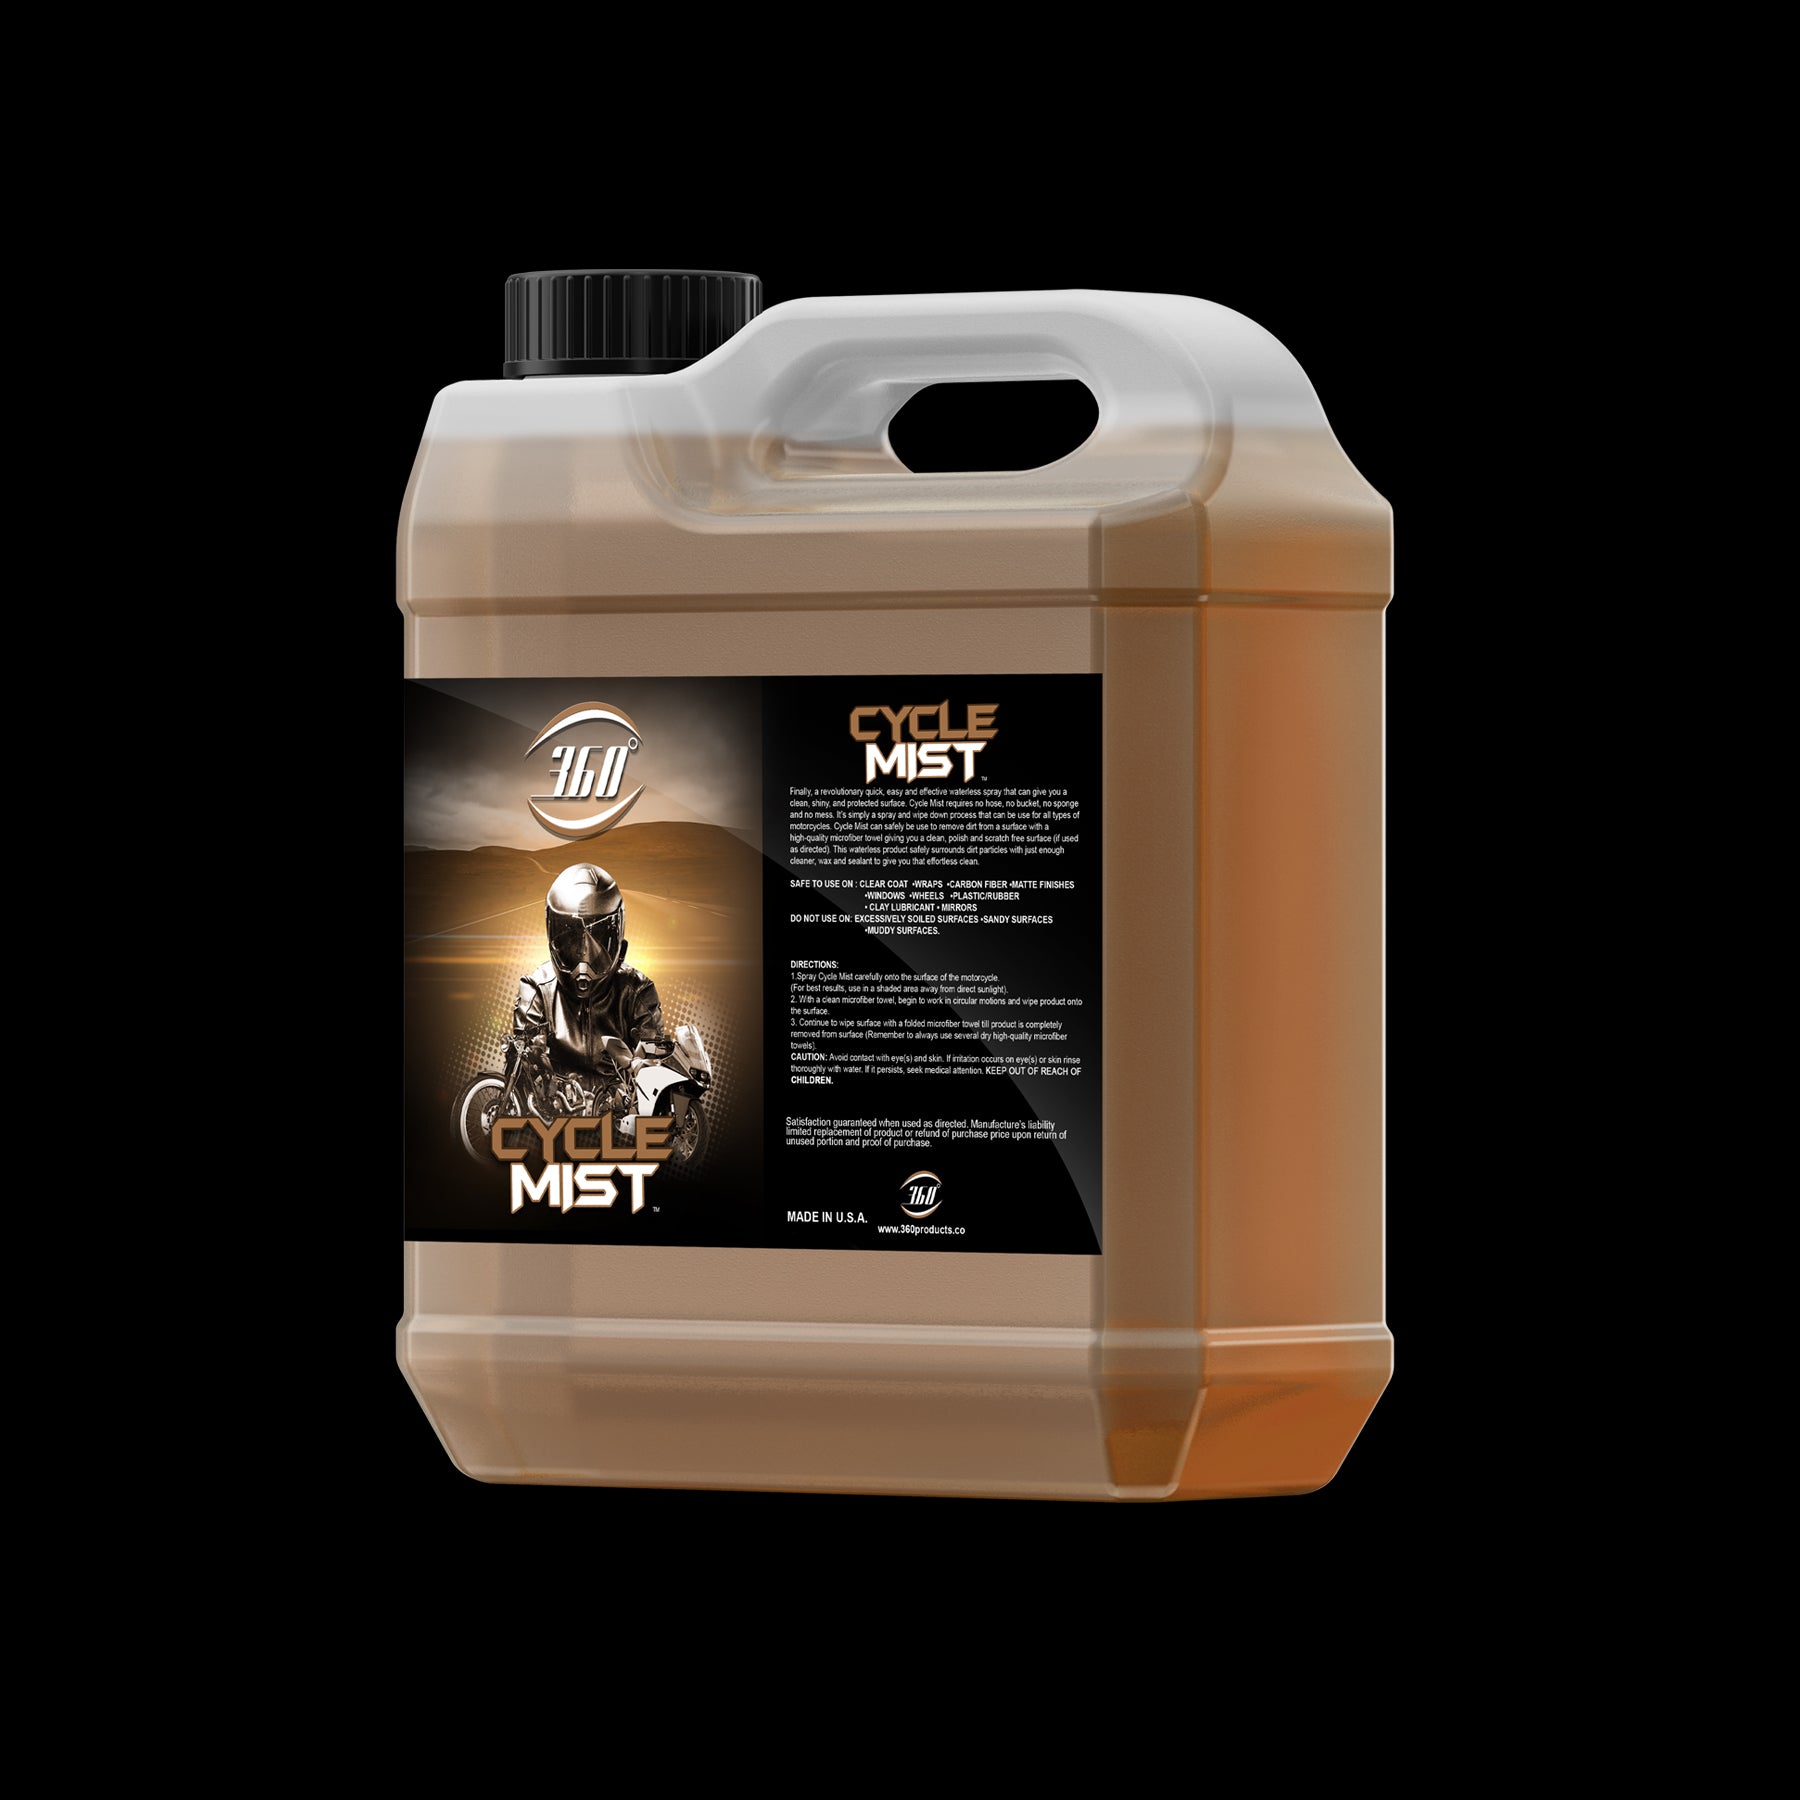 Cycle Mist: Motorcycle cleaner